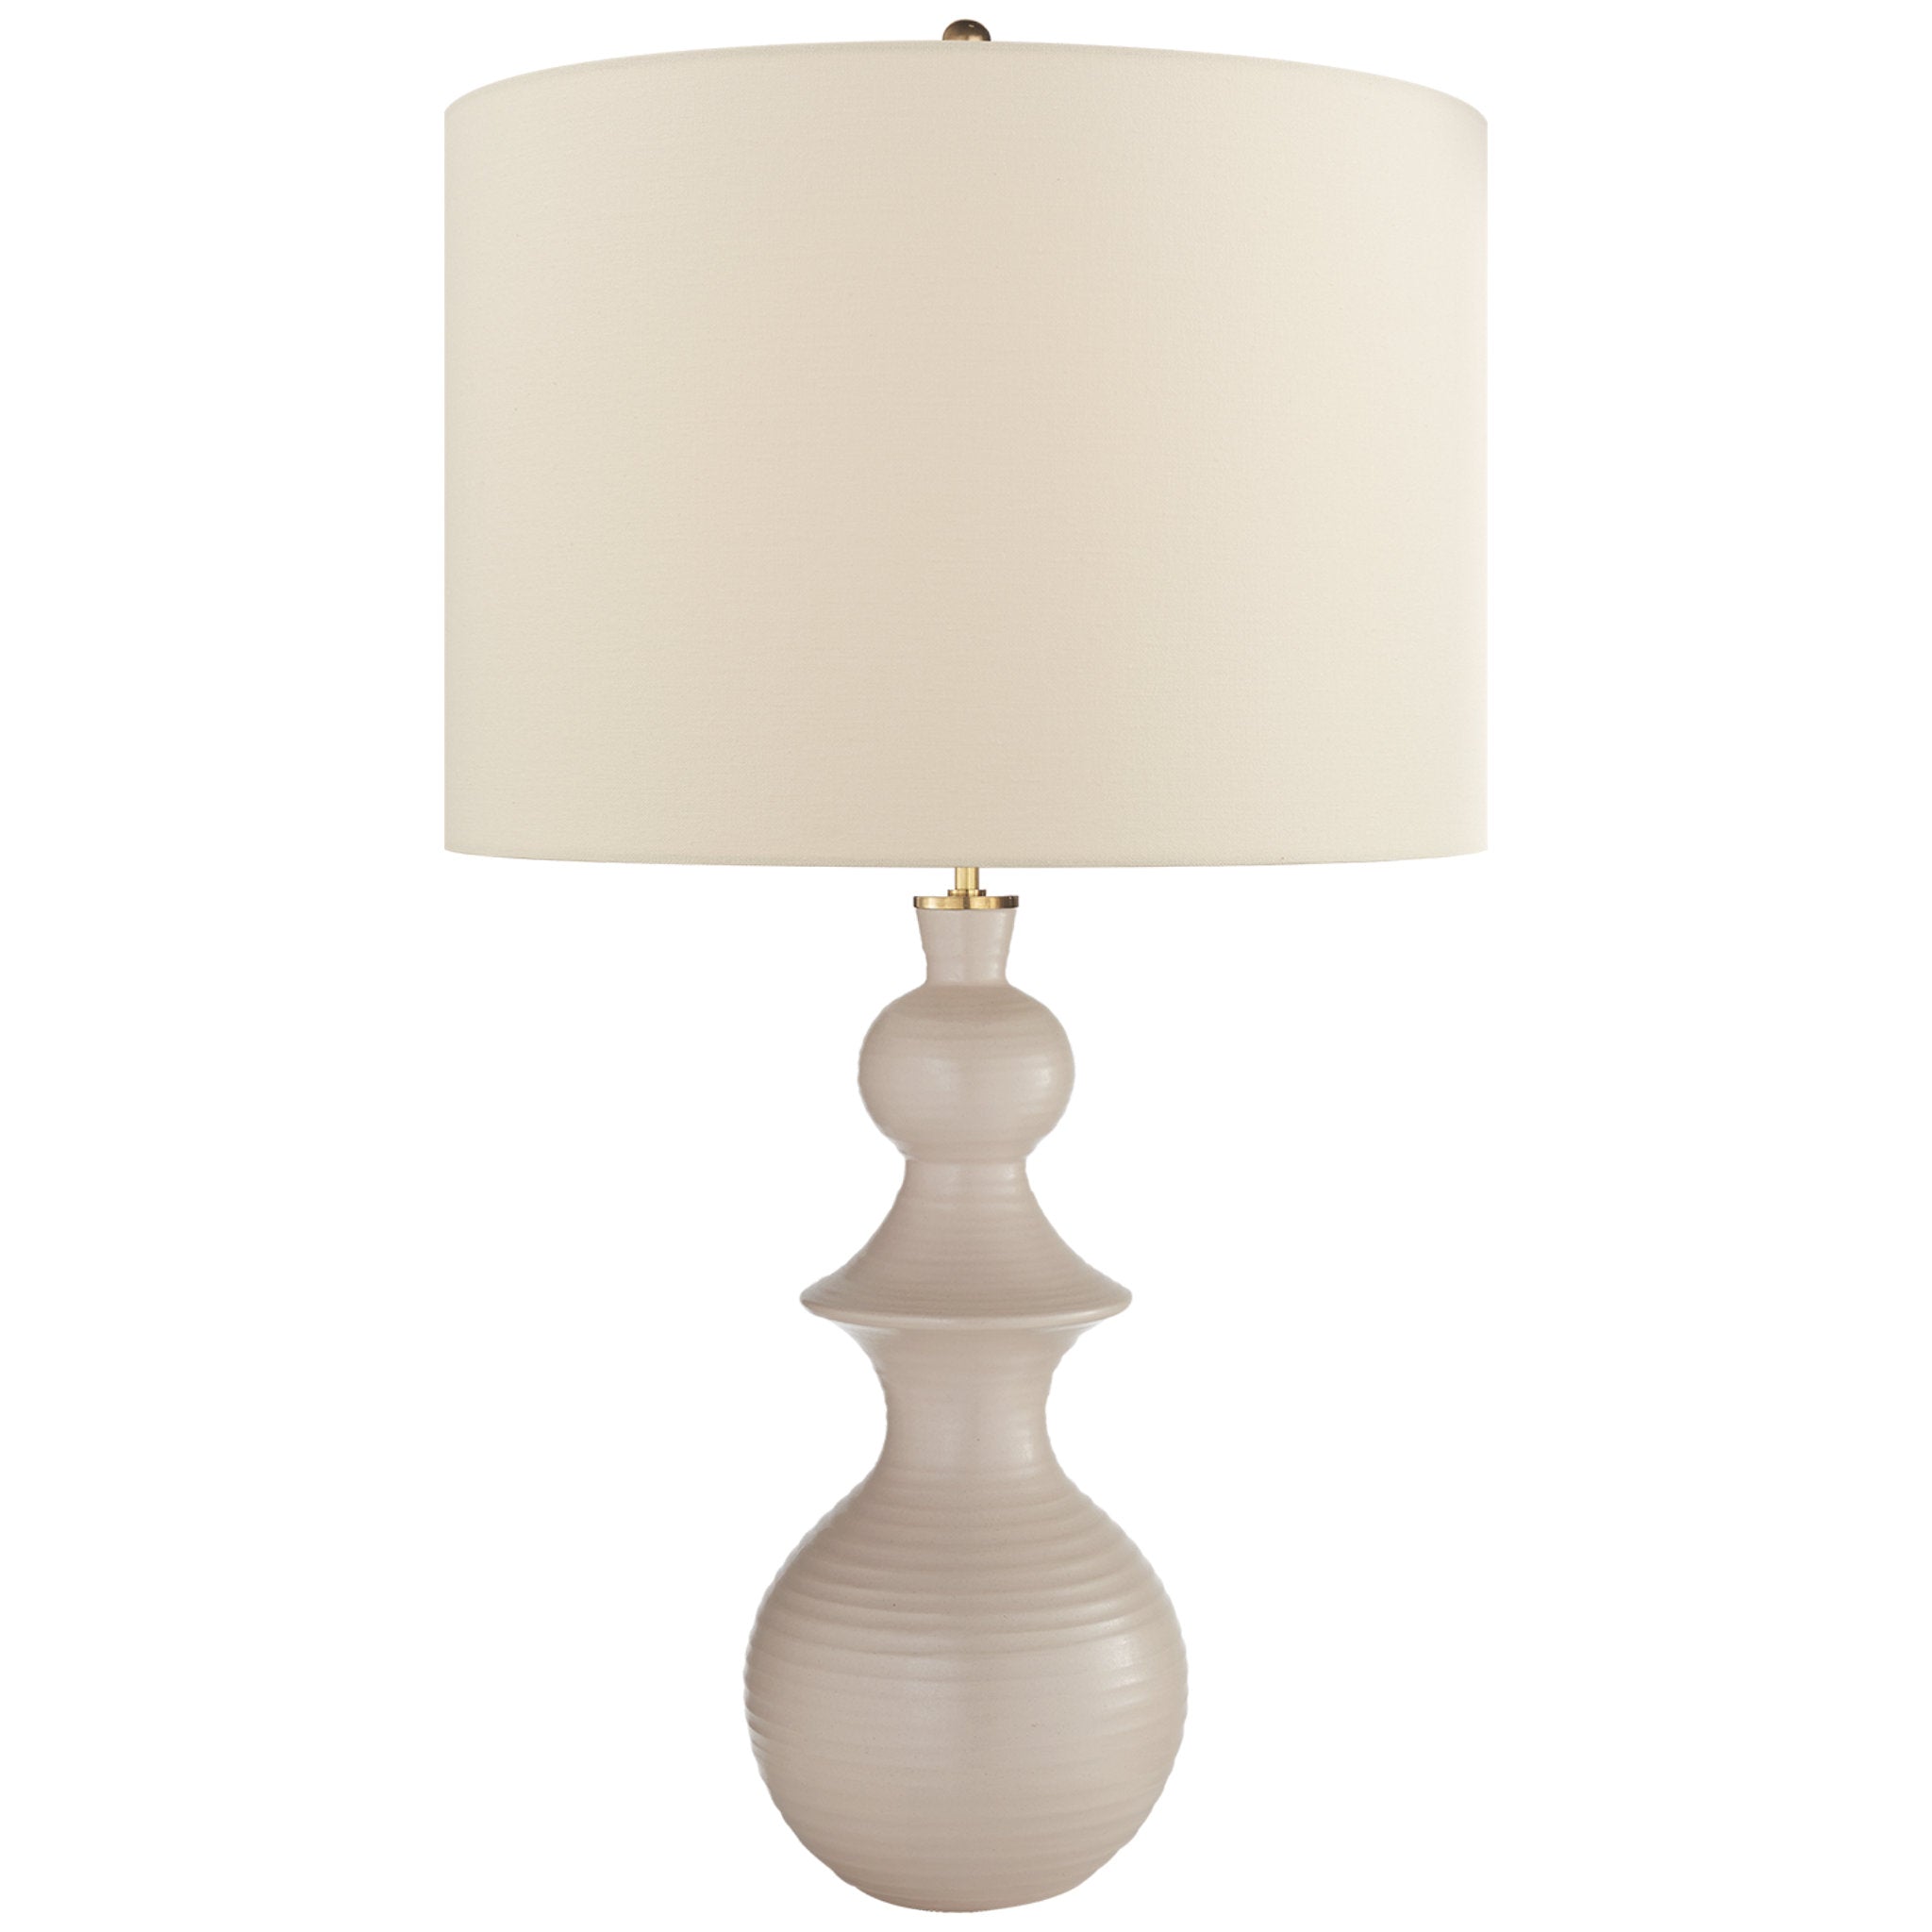 kate spade new york Saxon Large Table Lamp in Blush with Linen Shade